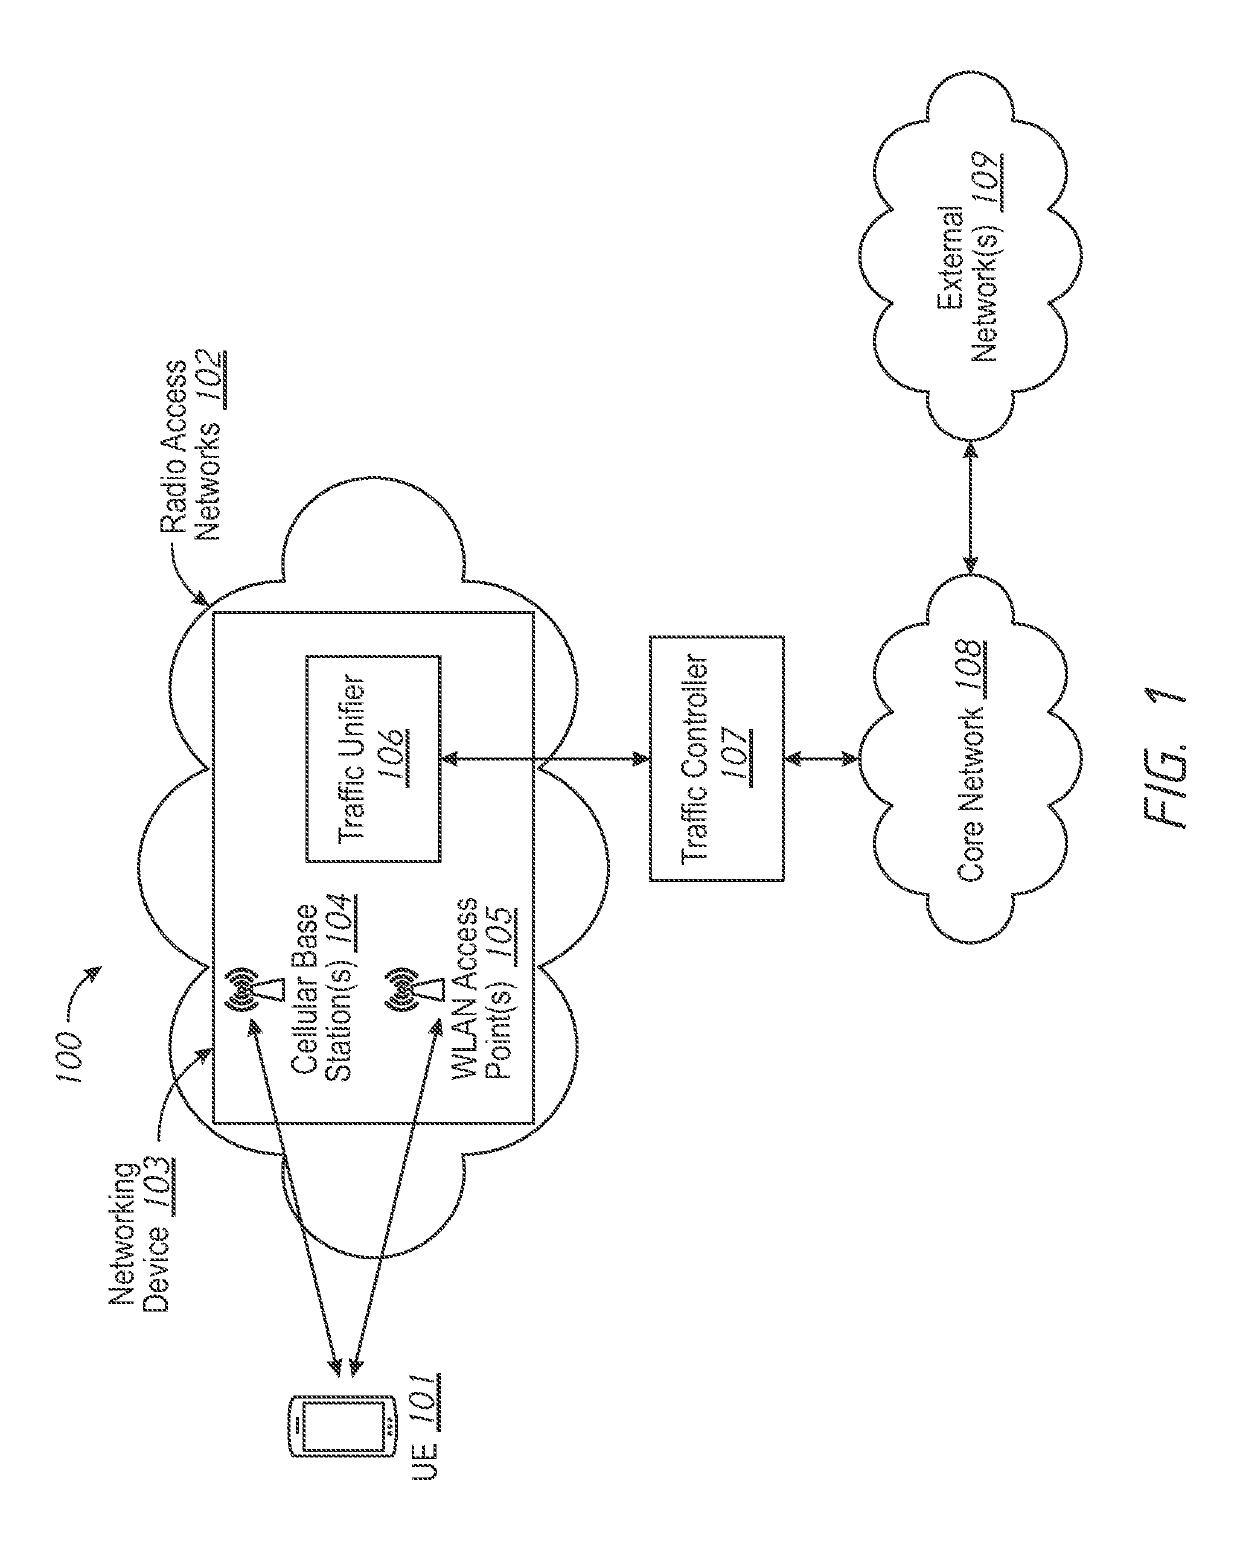 Enhancing Visibility in a Heterogeneous Network